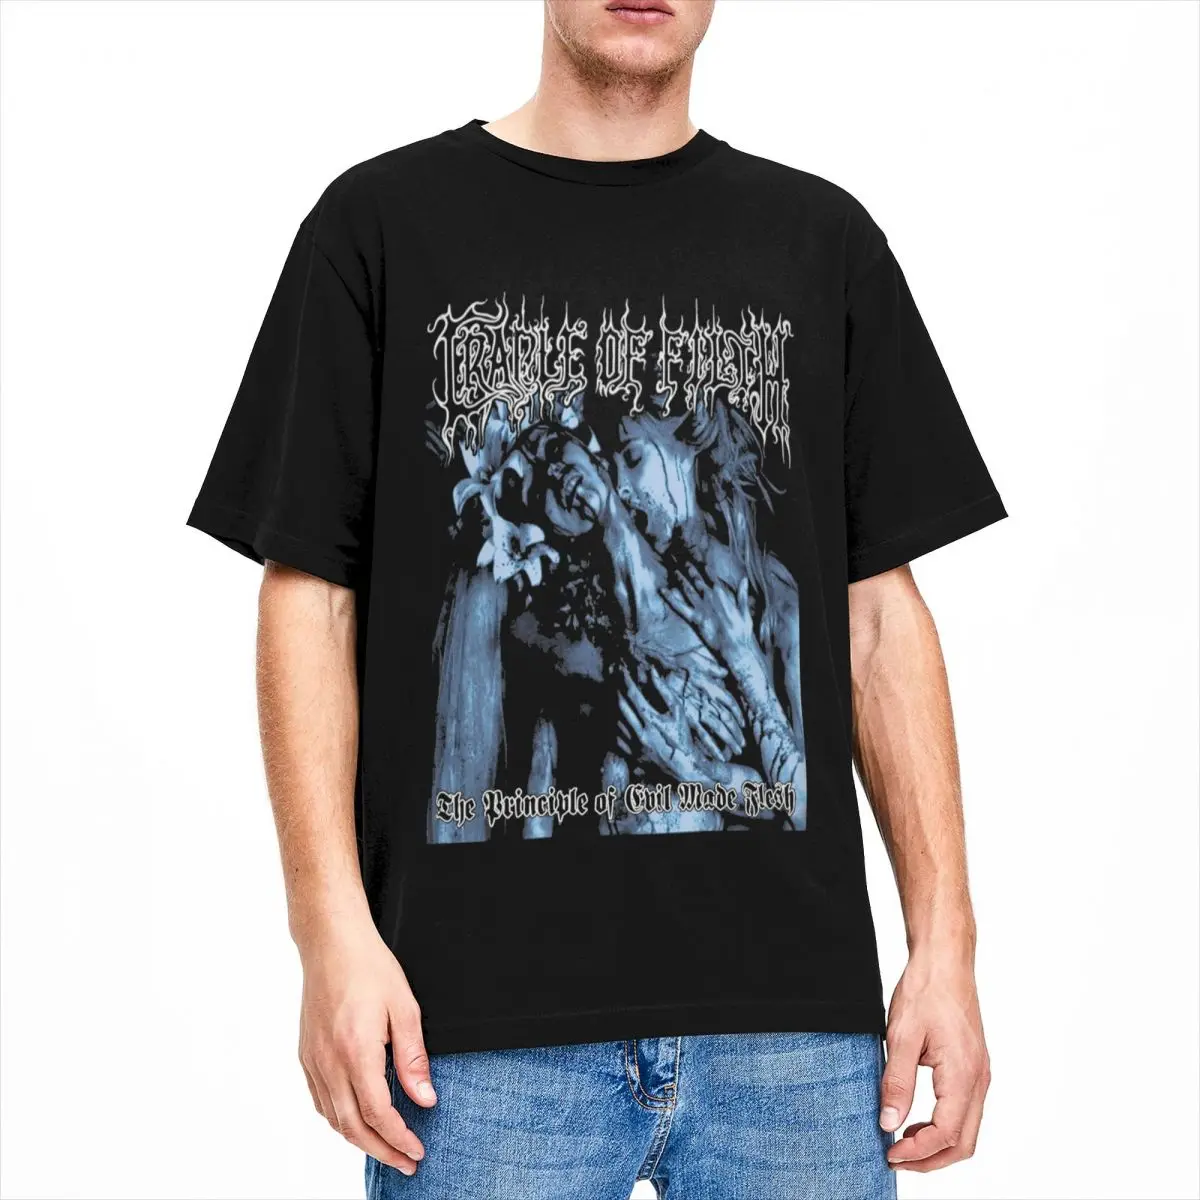 

Cradle Of Filth Extreme Metal Band T Shirts The Principle of Evil Made Flesh Accessories Tee Shirt Crew Neck T-Shirts Cotton